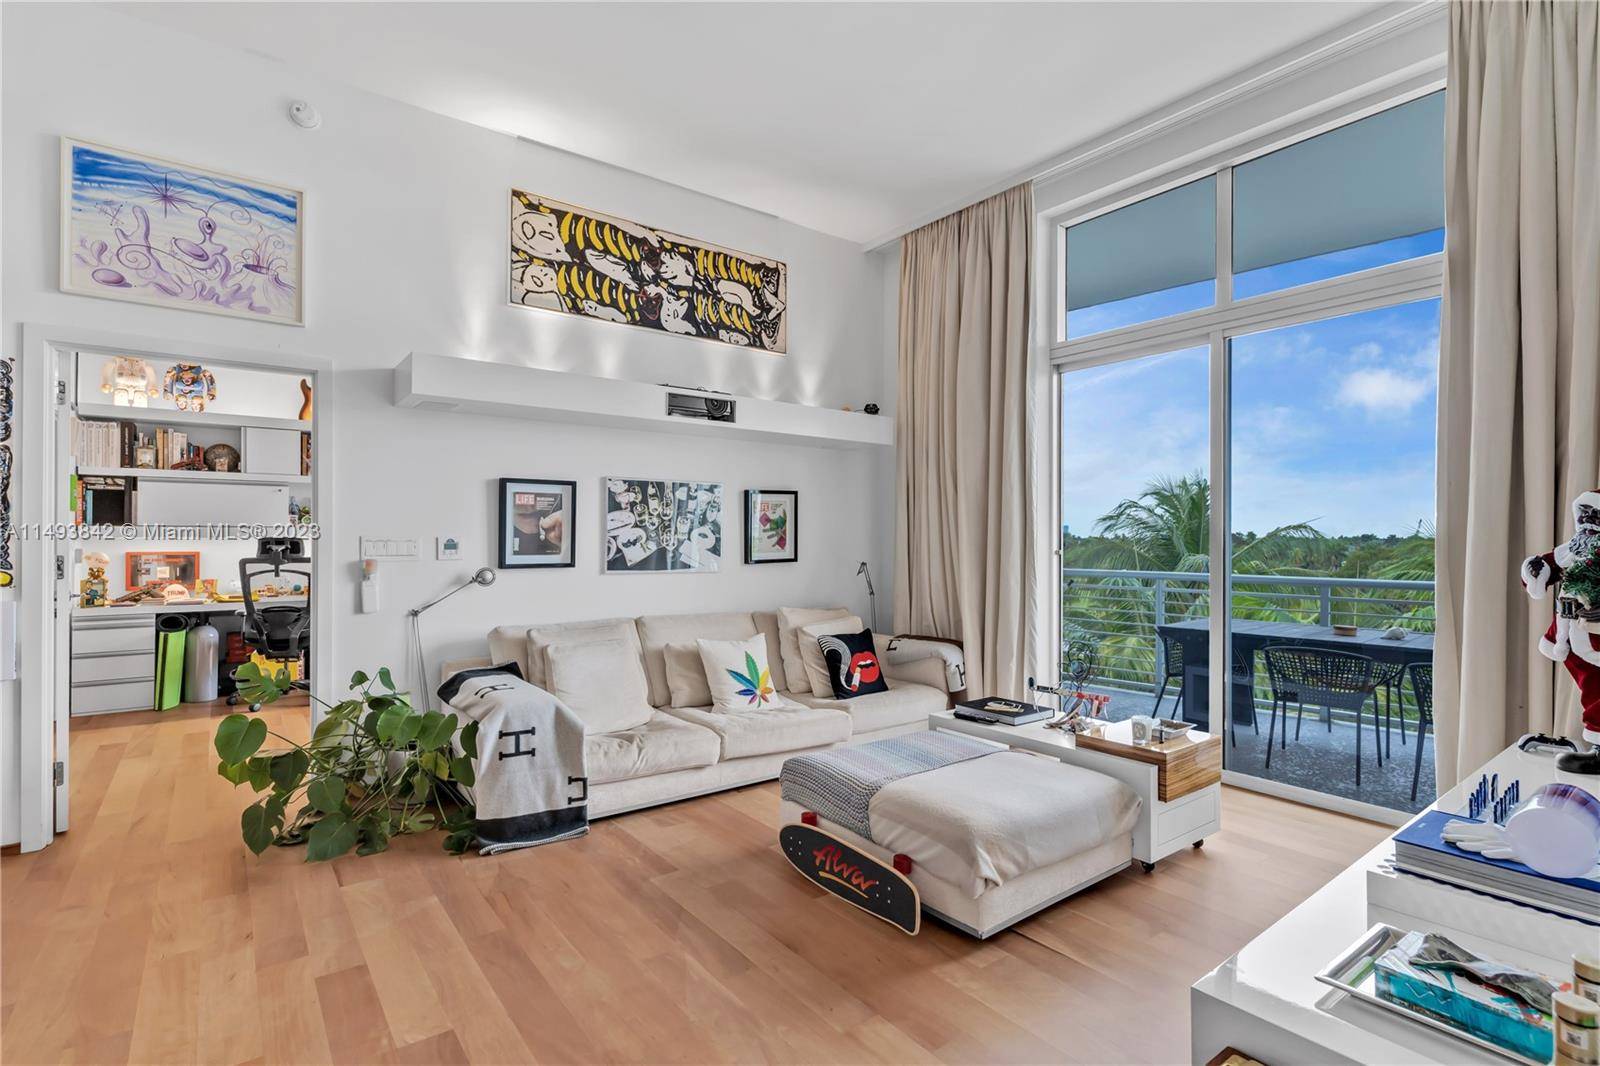 Tucked away on Meridian Ave along Miami Beach Golf Course this quiet, luxury boutique style building has all the amenities comforts to live your desired Miami Beach lifestyle.